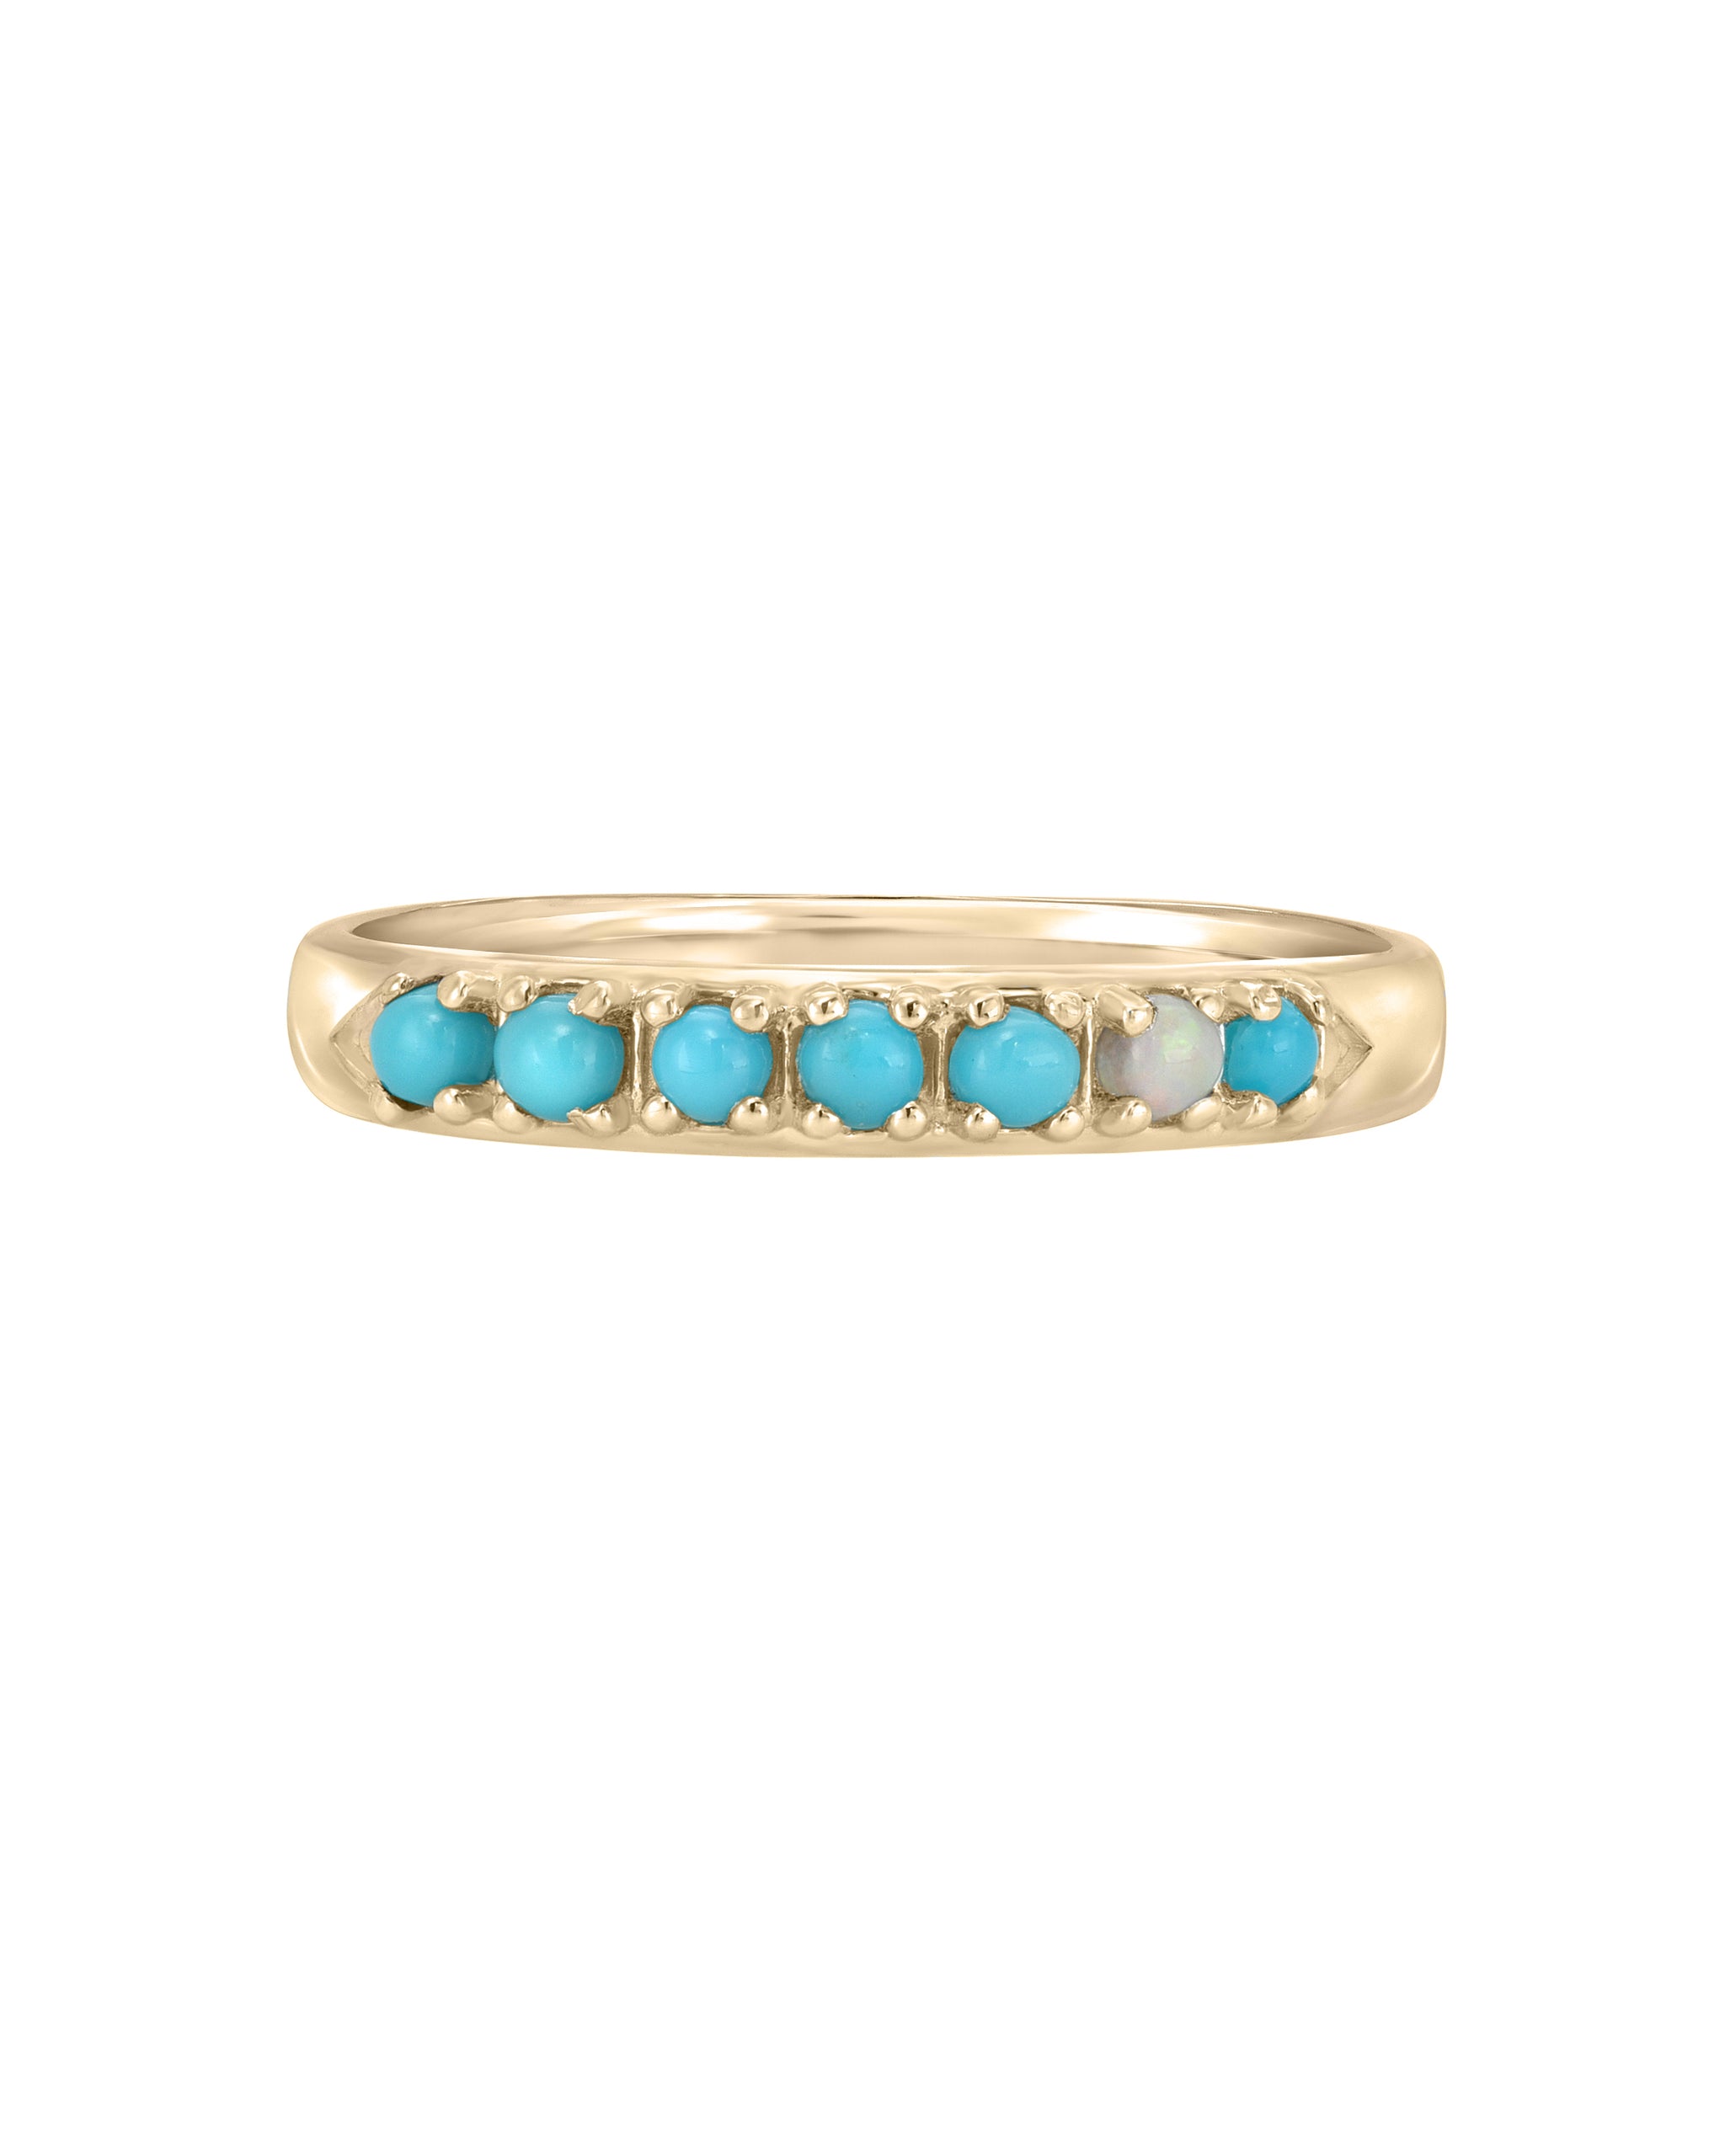 Wylde Ring, Turquoise and Opal 14k yellow gold chevron ring, handmade by Turquoise + Tobacco in Los Angeles, California